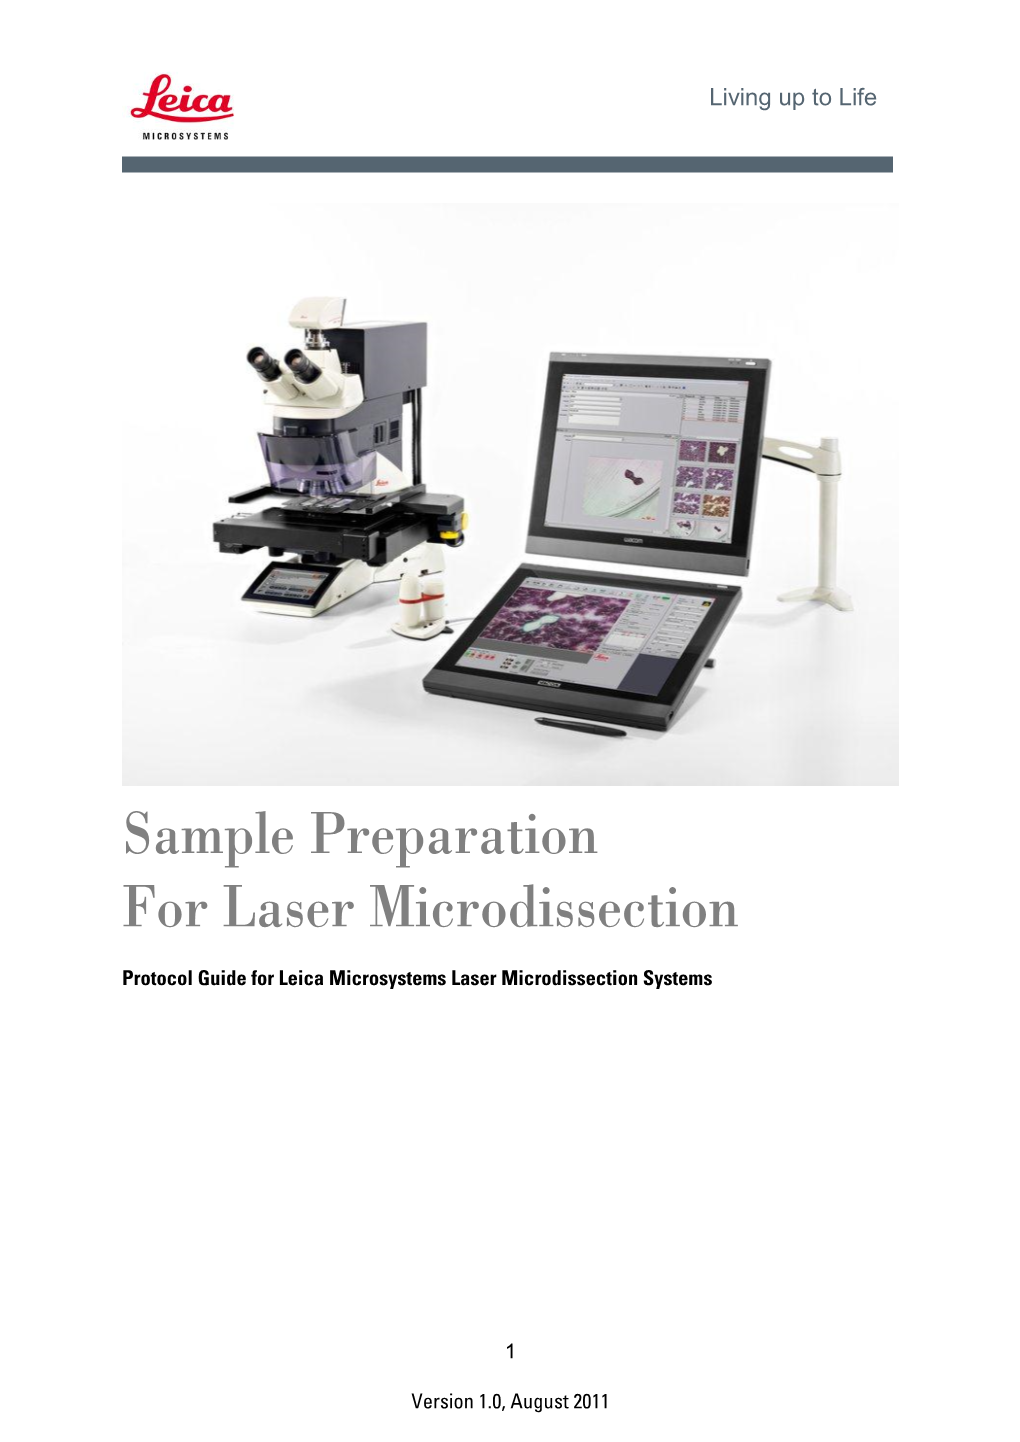 Sample Preparation for Laser Microdissection